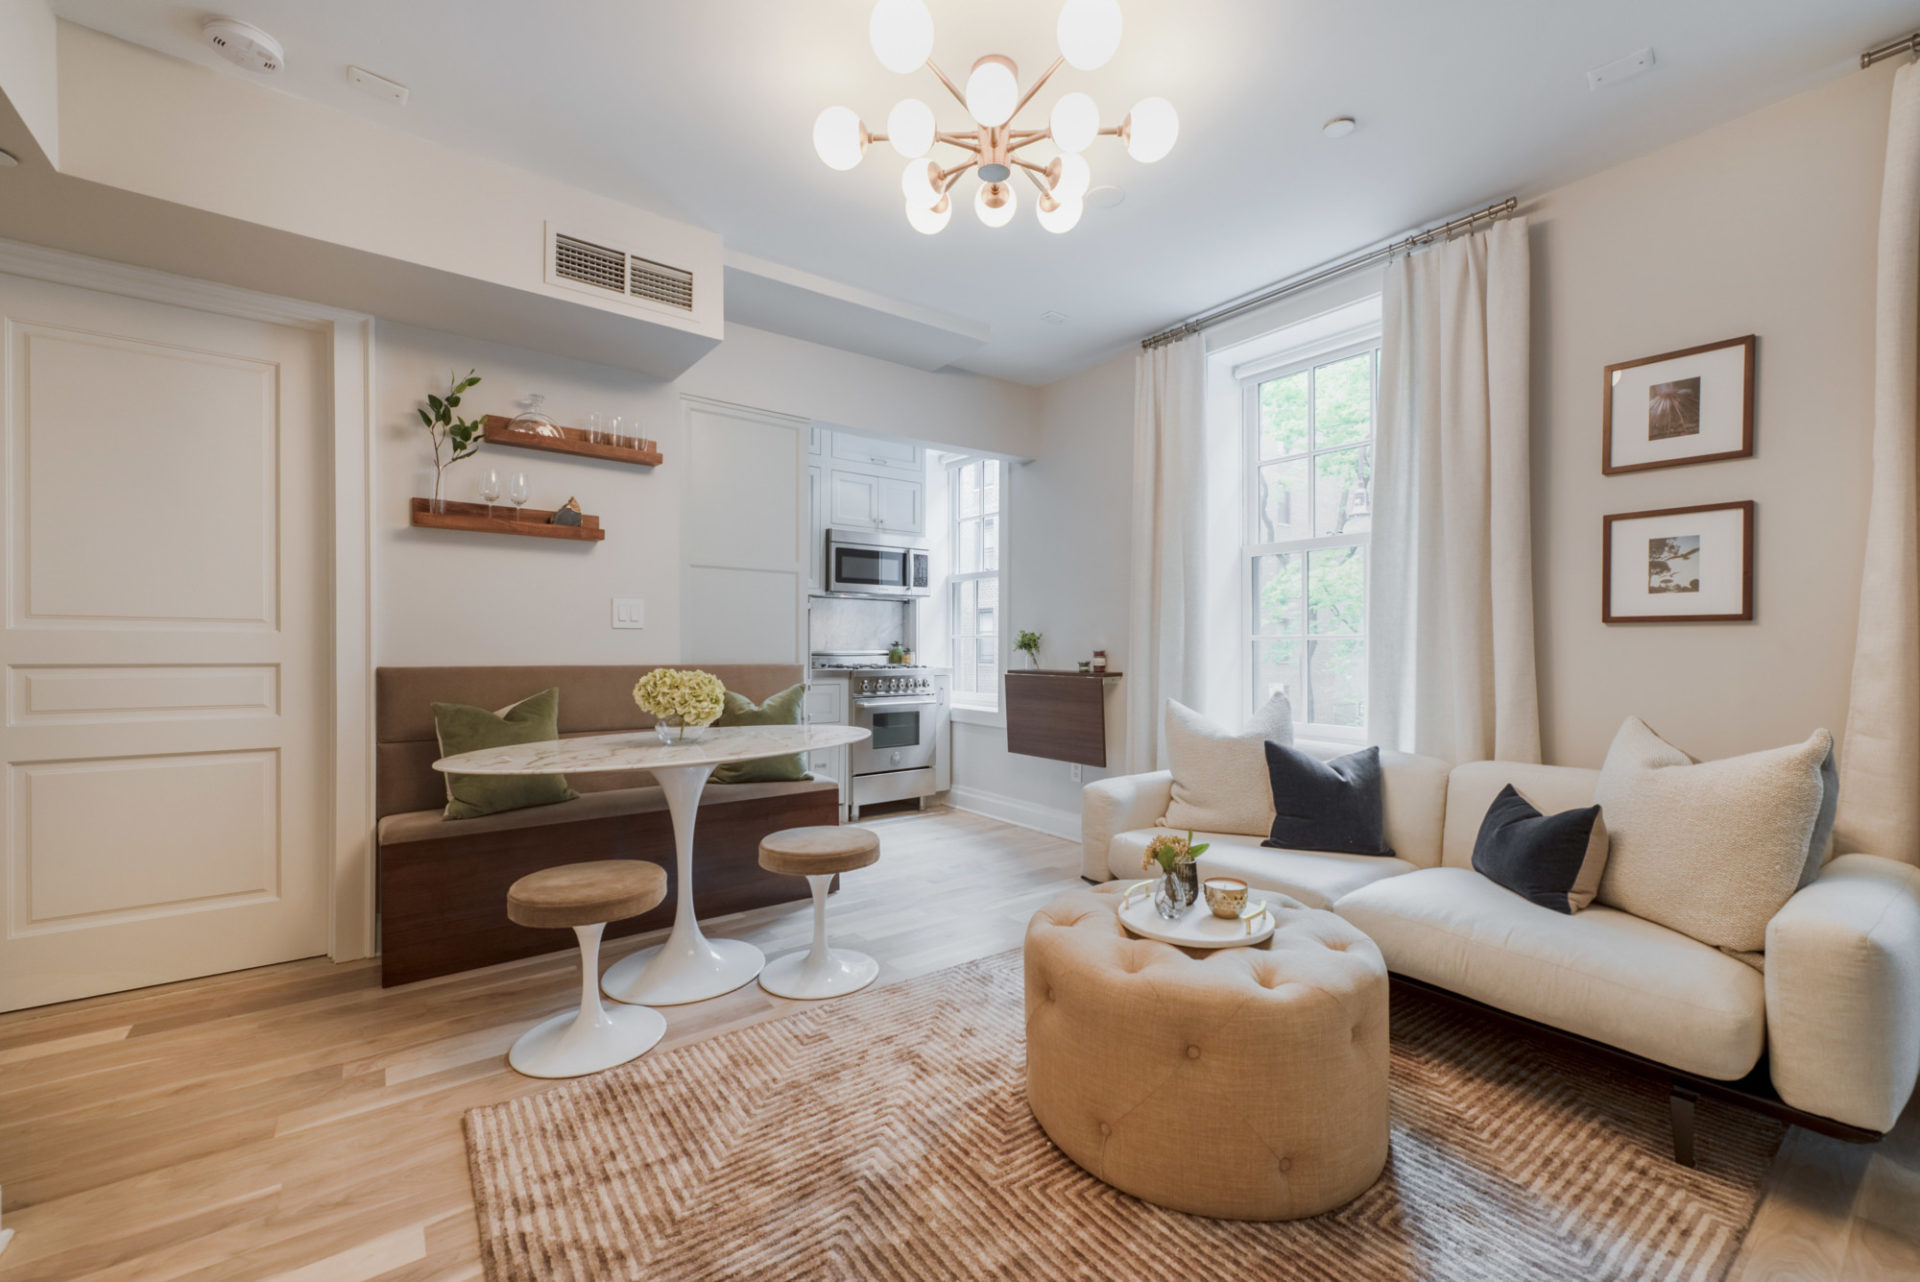 How to Hire an Interior Designer in NYC